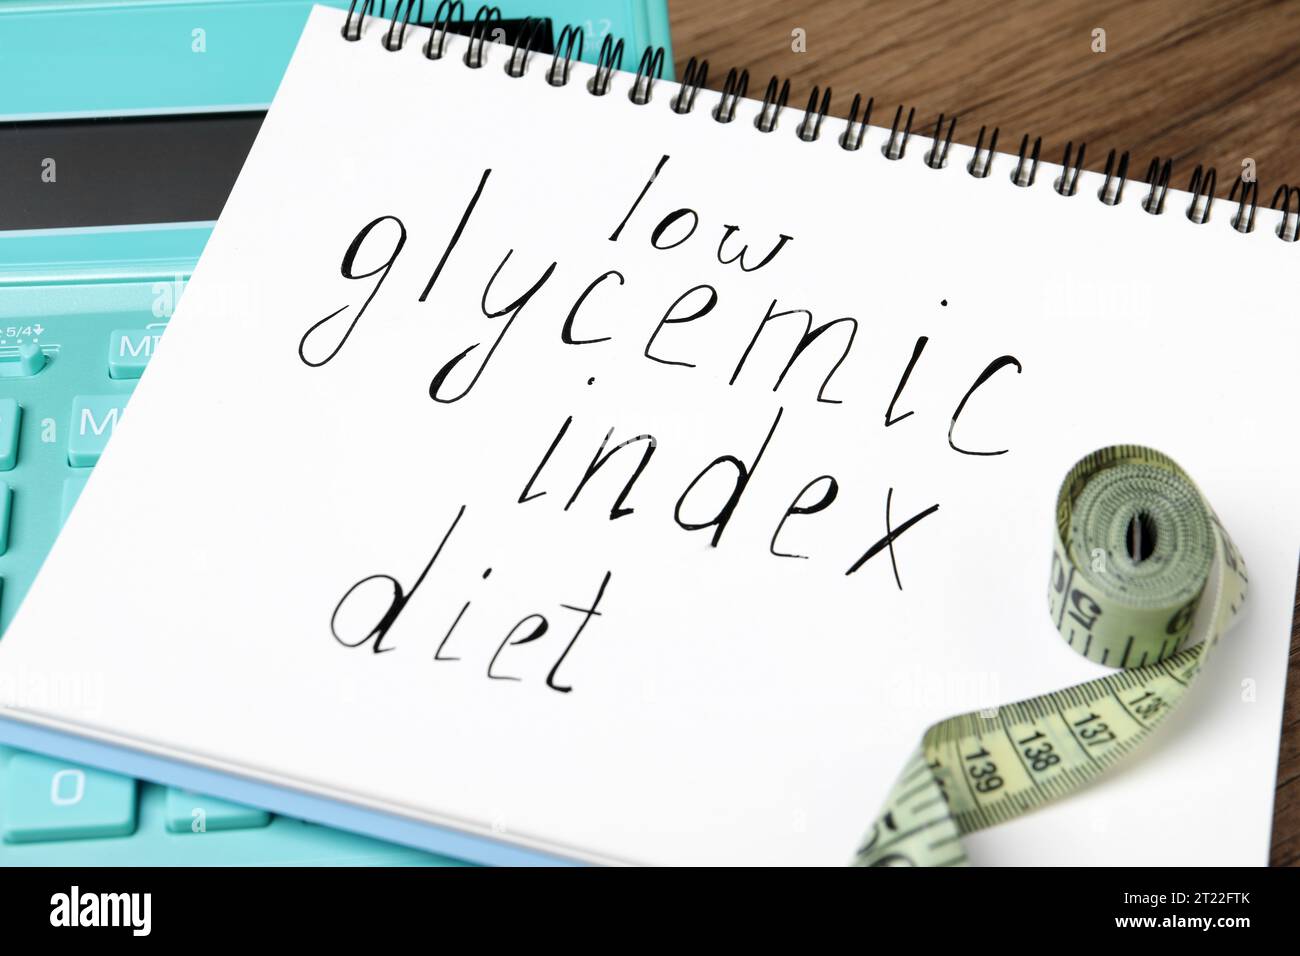 Notebook with words Low Glycemic Index Diet, measuring tape and calculator on table, closeup Stock Photo